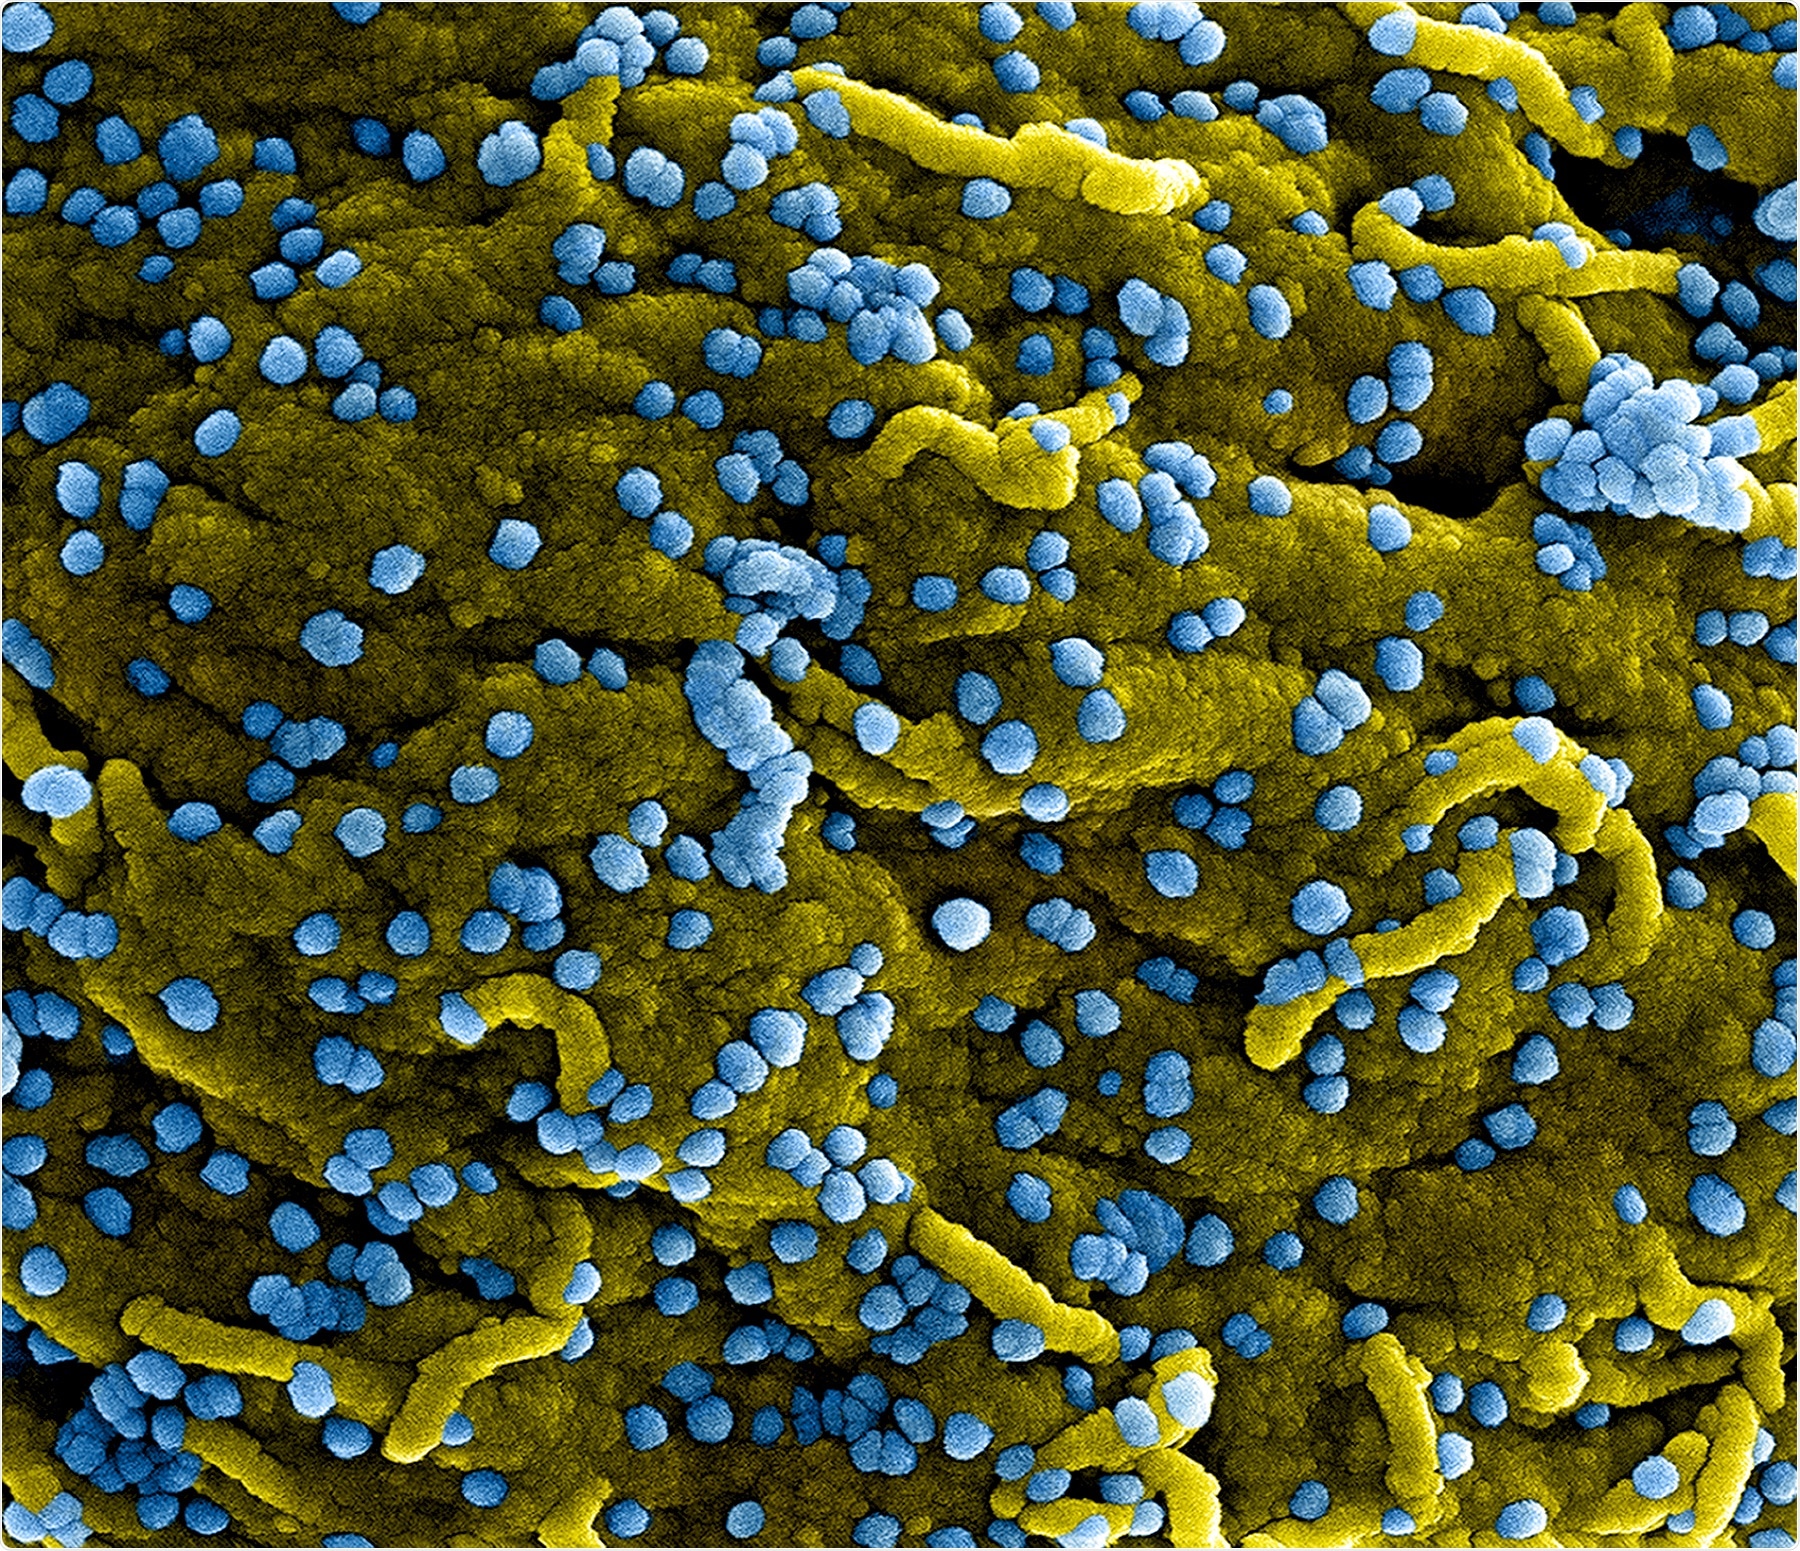 MERS Coronavirus Particles Colorized scanning electron micrograph of Marburg virus particles (blue) both budding and attached to the surface of infected VERO E6 cells (yellow). Image captured and color-enhanced at the NIAID Integrated Research Facility in Fort Detrick, Maryland. Credit: NIAID